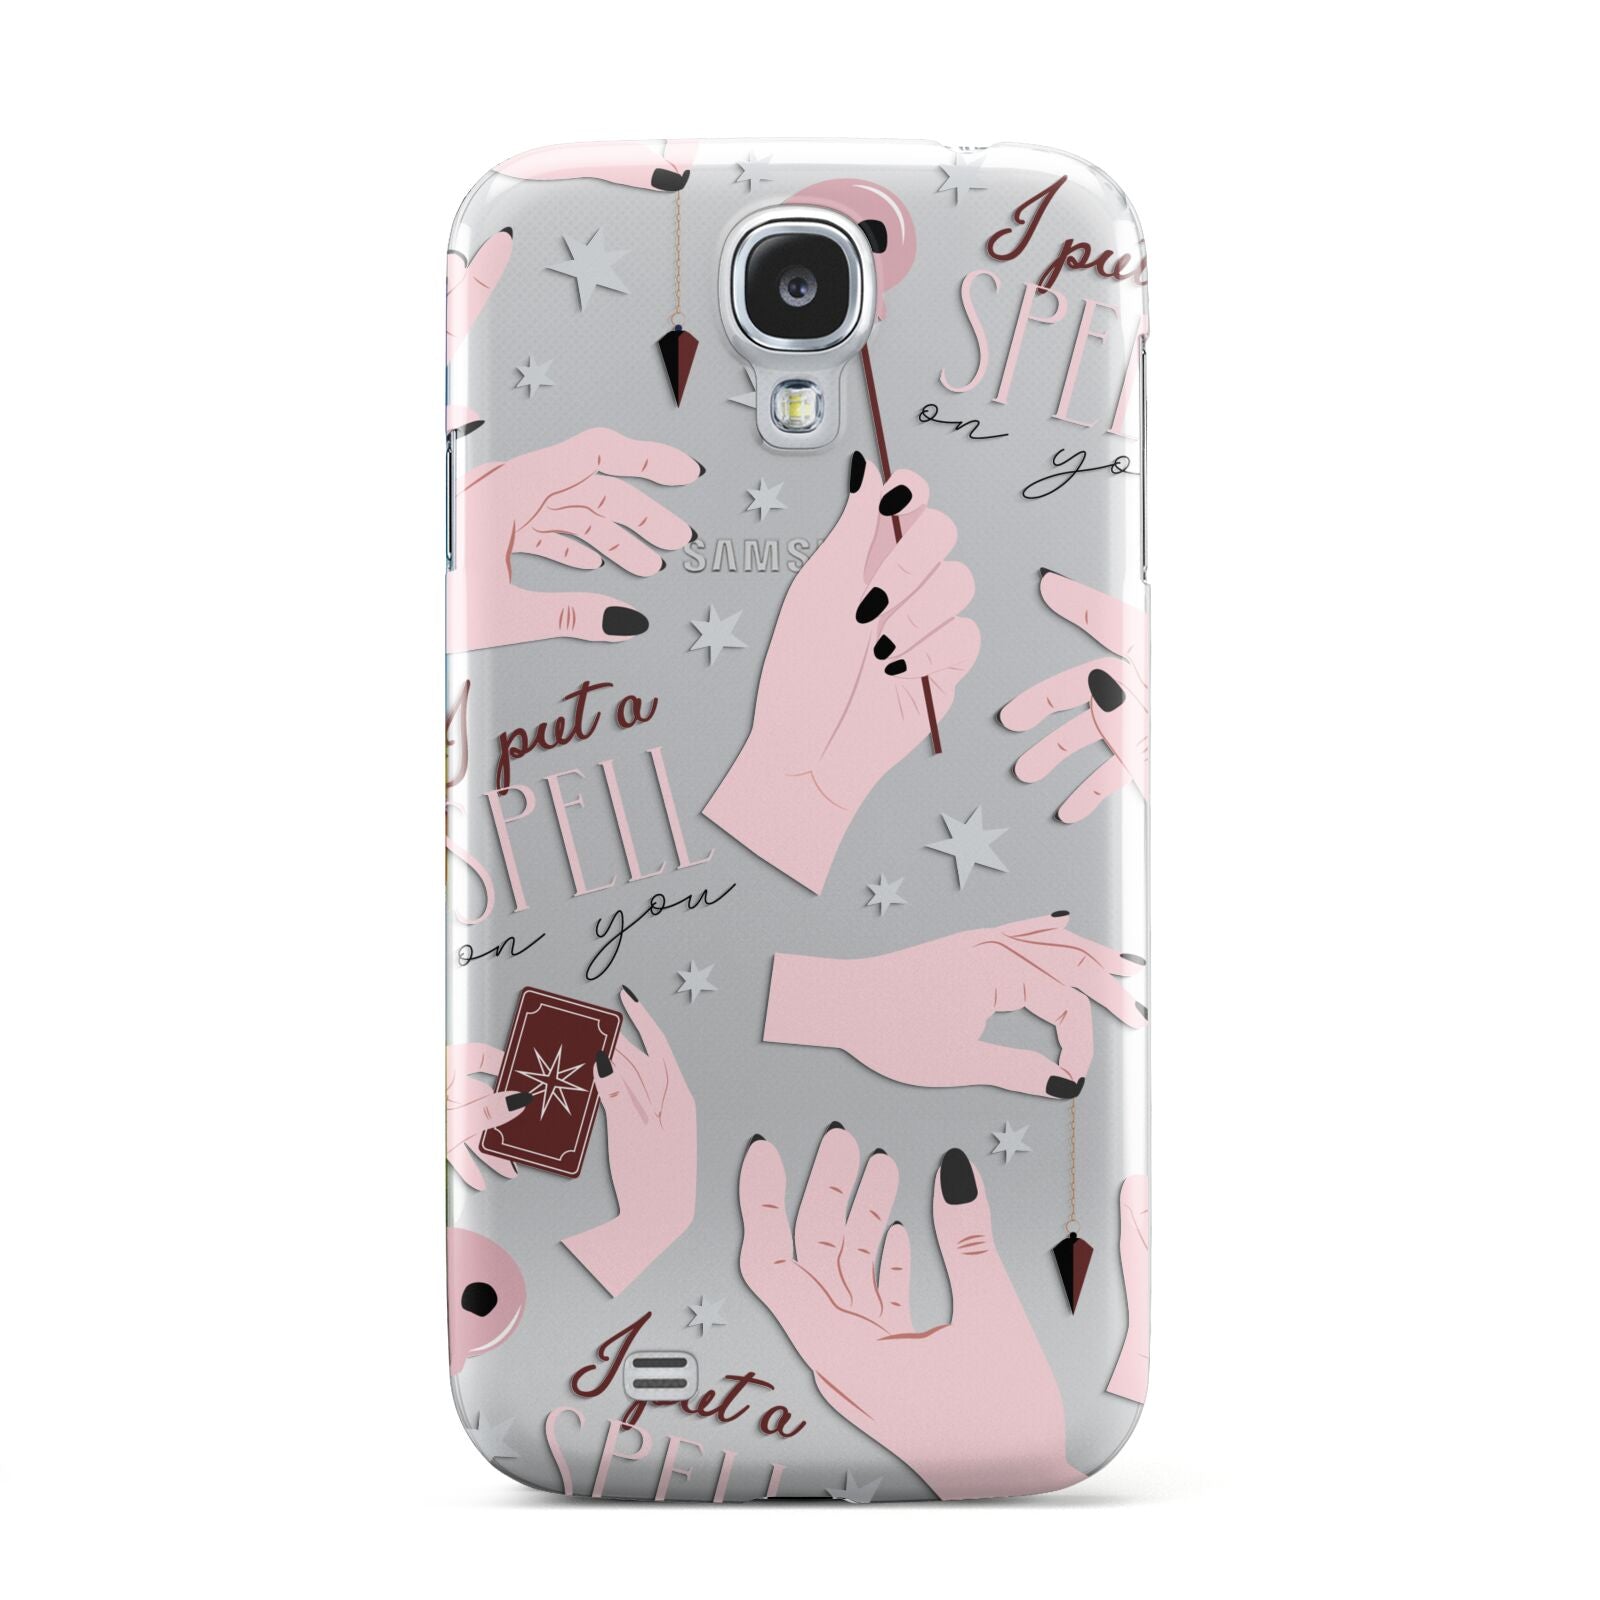 Witches Hands and Tarot Cards Samsung Galaxy S4 Case